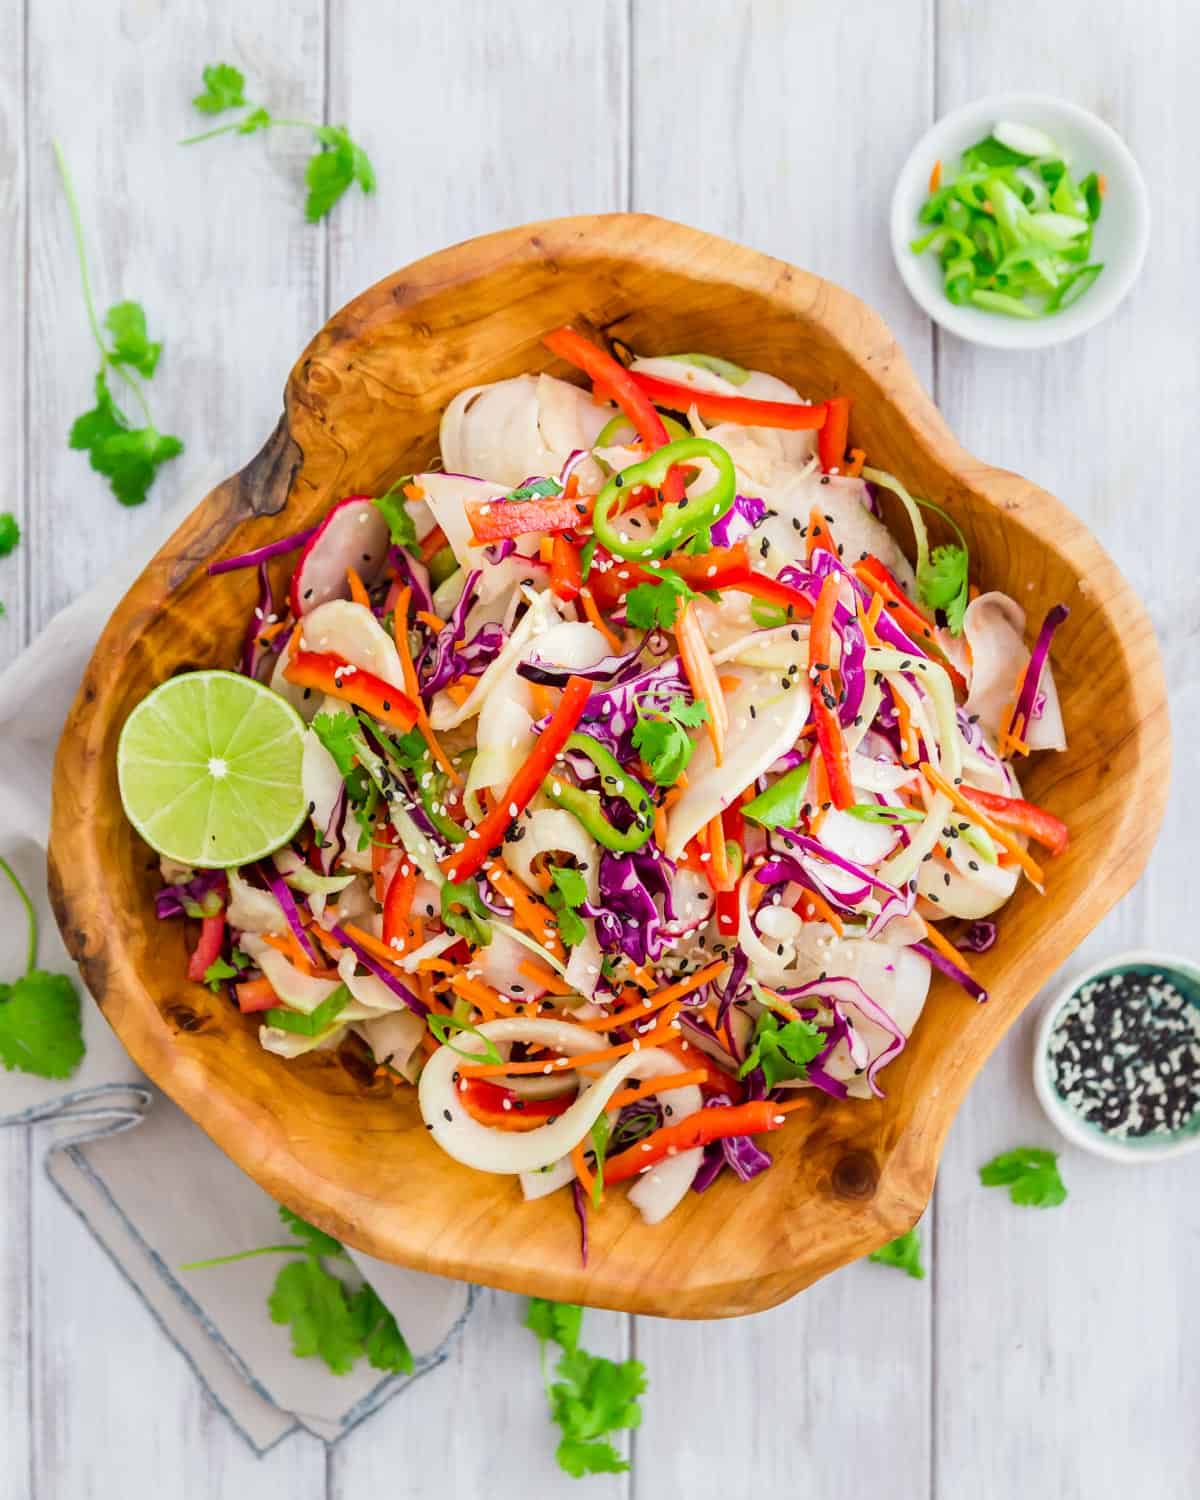 A colorful, easy salad with kohlrabi noodles, red cabbage, red pepper, carrots, radishes and green onion all tossed with a Thai inspired vinaigrette.